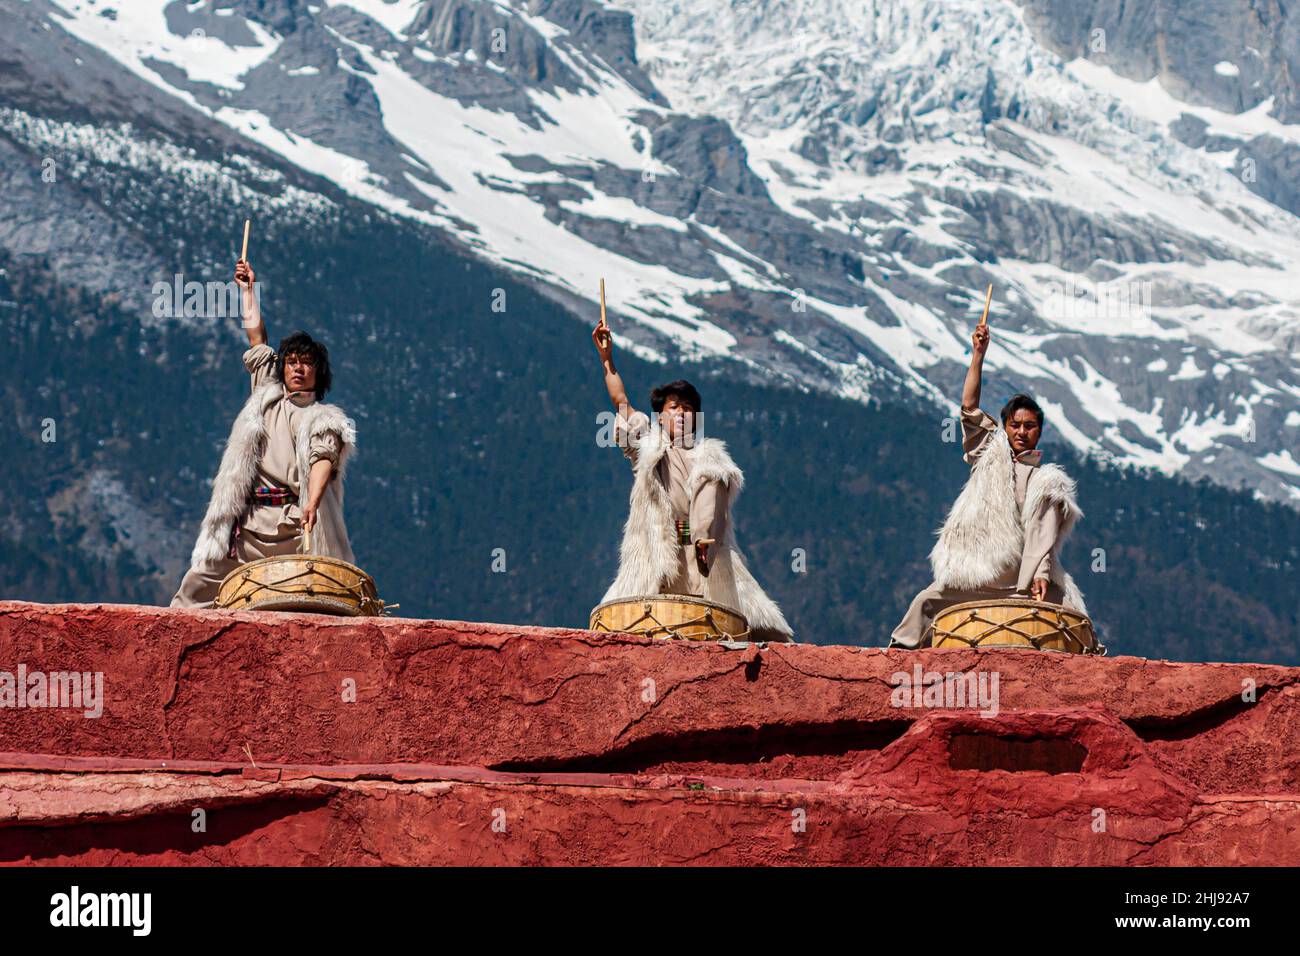 The ethnic minority of the Naxi people in their traditional costumes; scene from a performance with the Jade Dragon Snow Mountain in the background Stock Photo